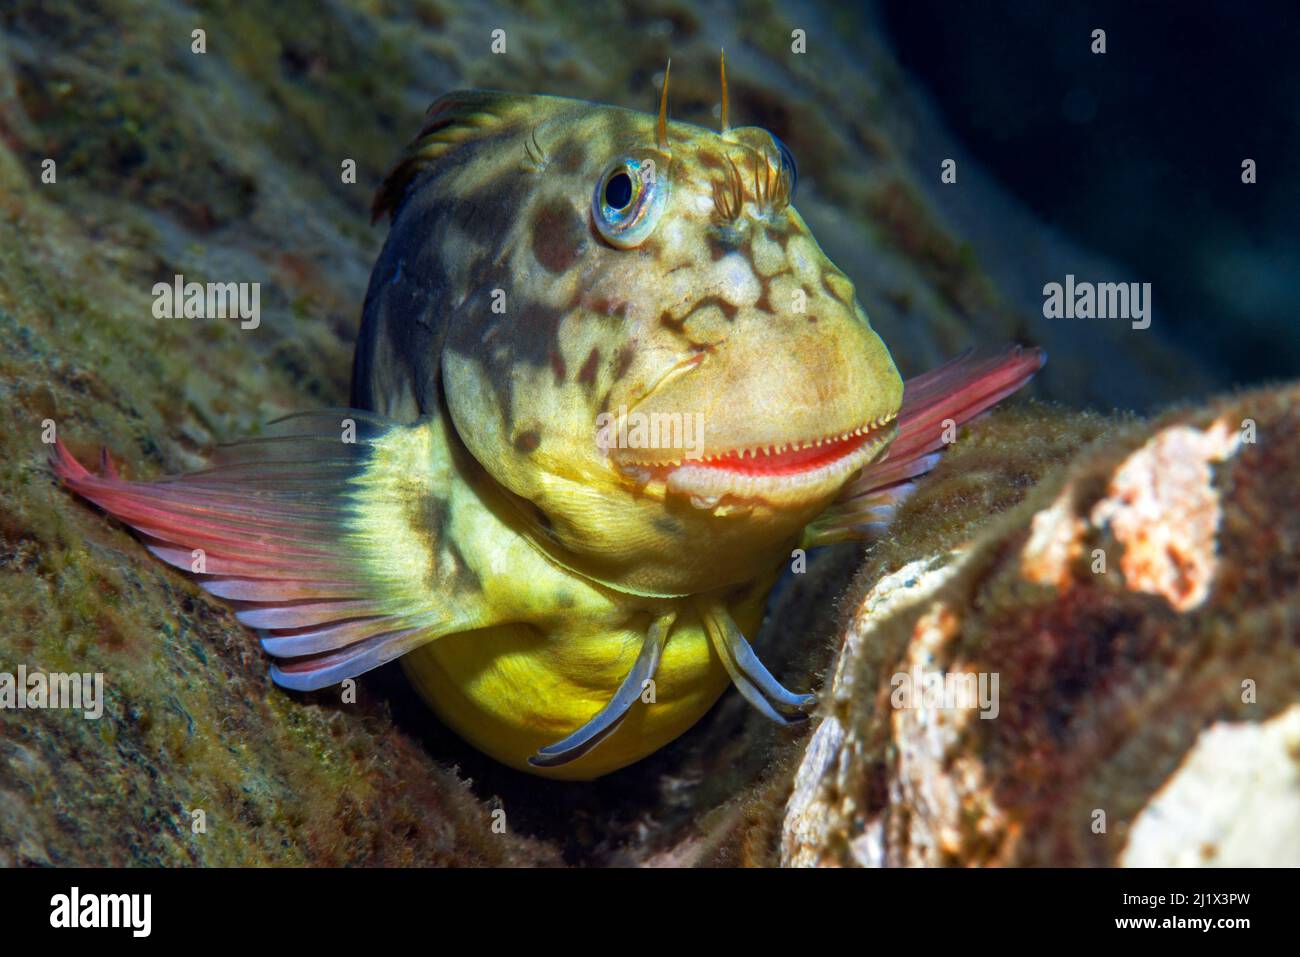 Red-lipped blenny (Ophioblennius atlanticus) portrait, Tenerife, Canary Islands. Stock Photo